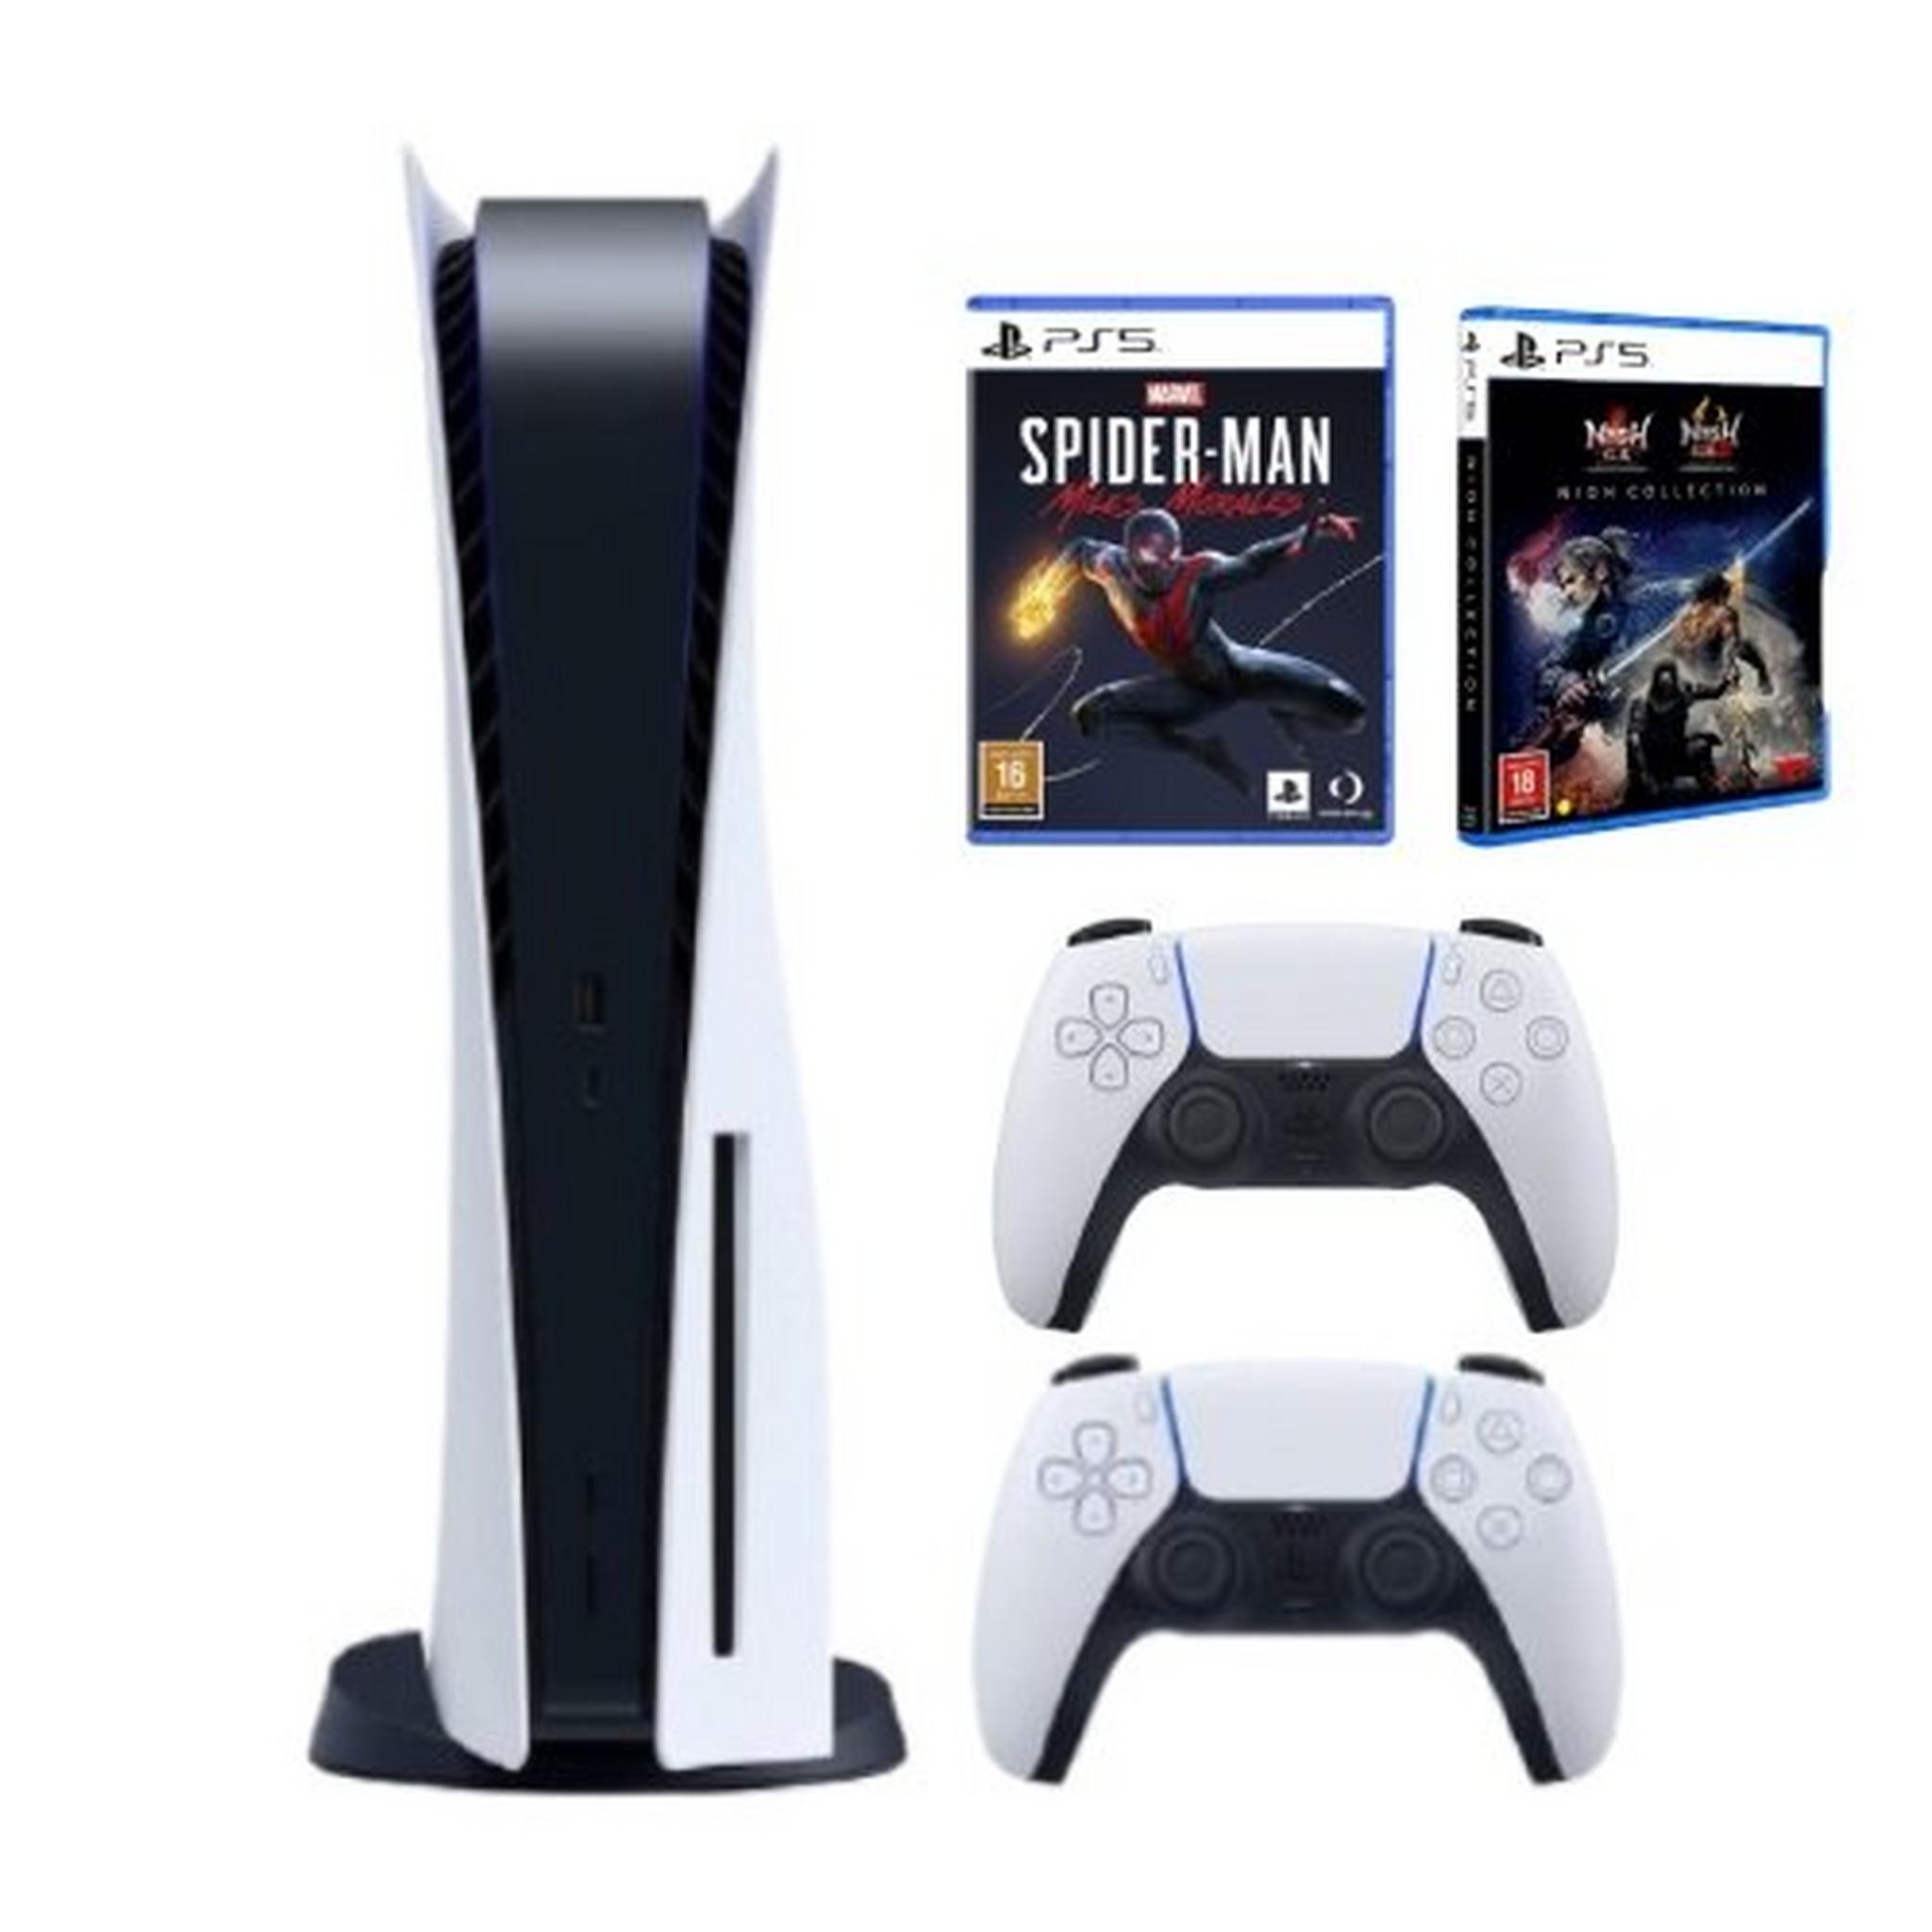 Sony PlayStation 5 Blu-Ray Disc Console + DualSense 5 Wireless Controller + Marvel's Spider-Man: Miles Morales + NIOH Collection Game Bundle